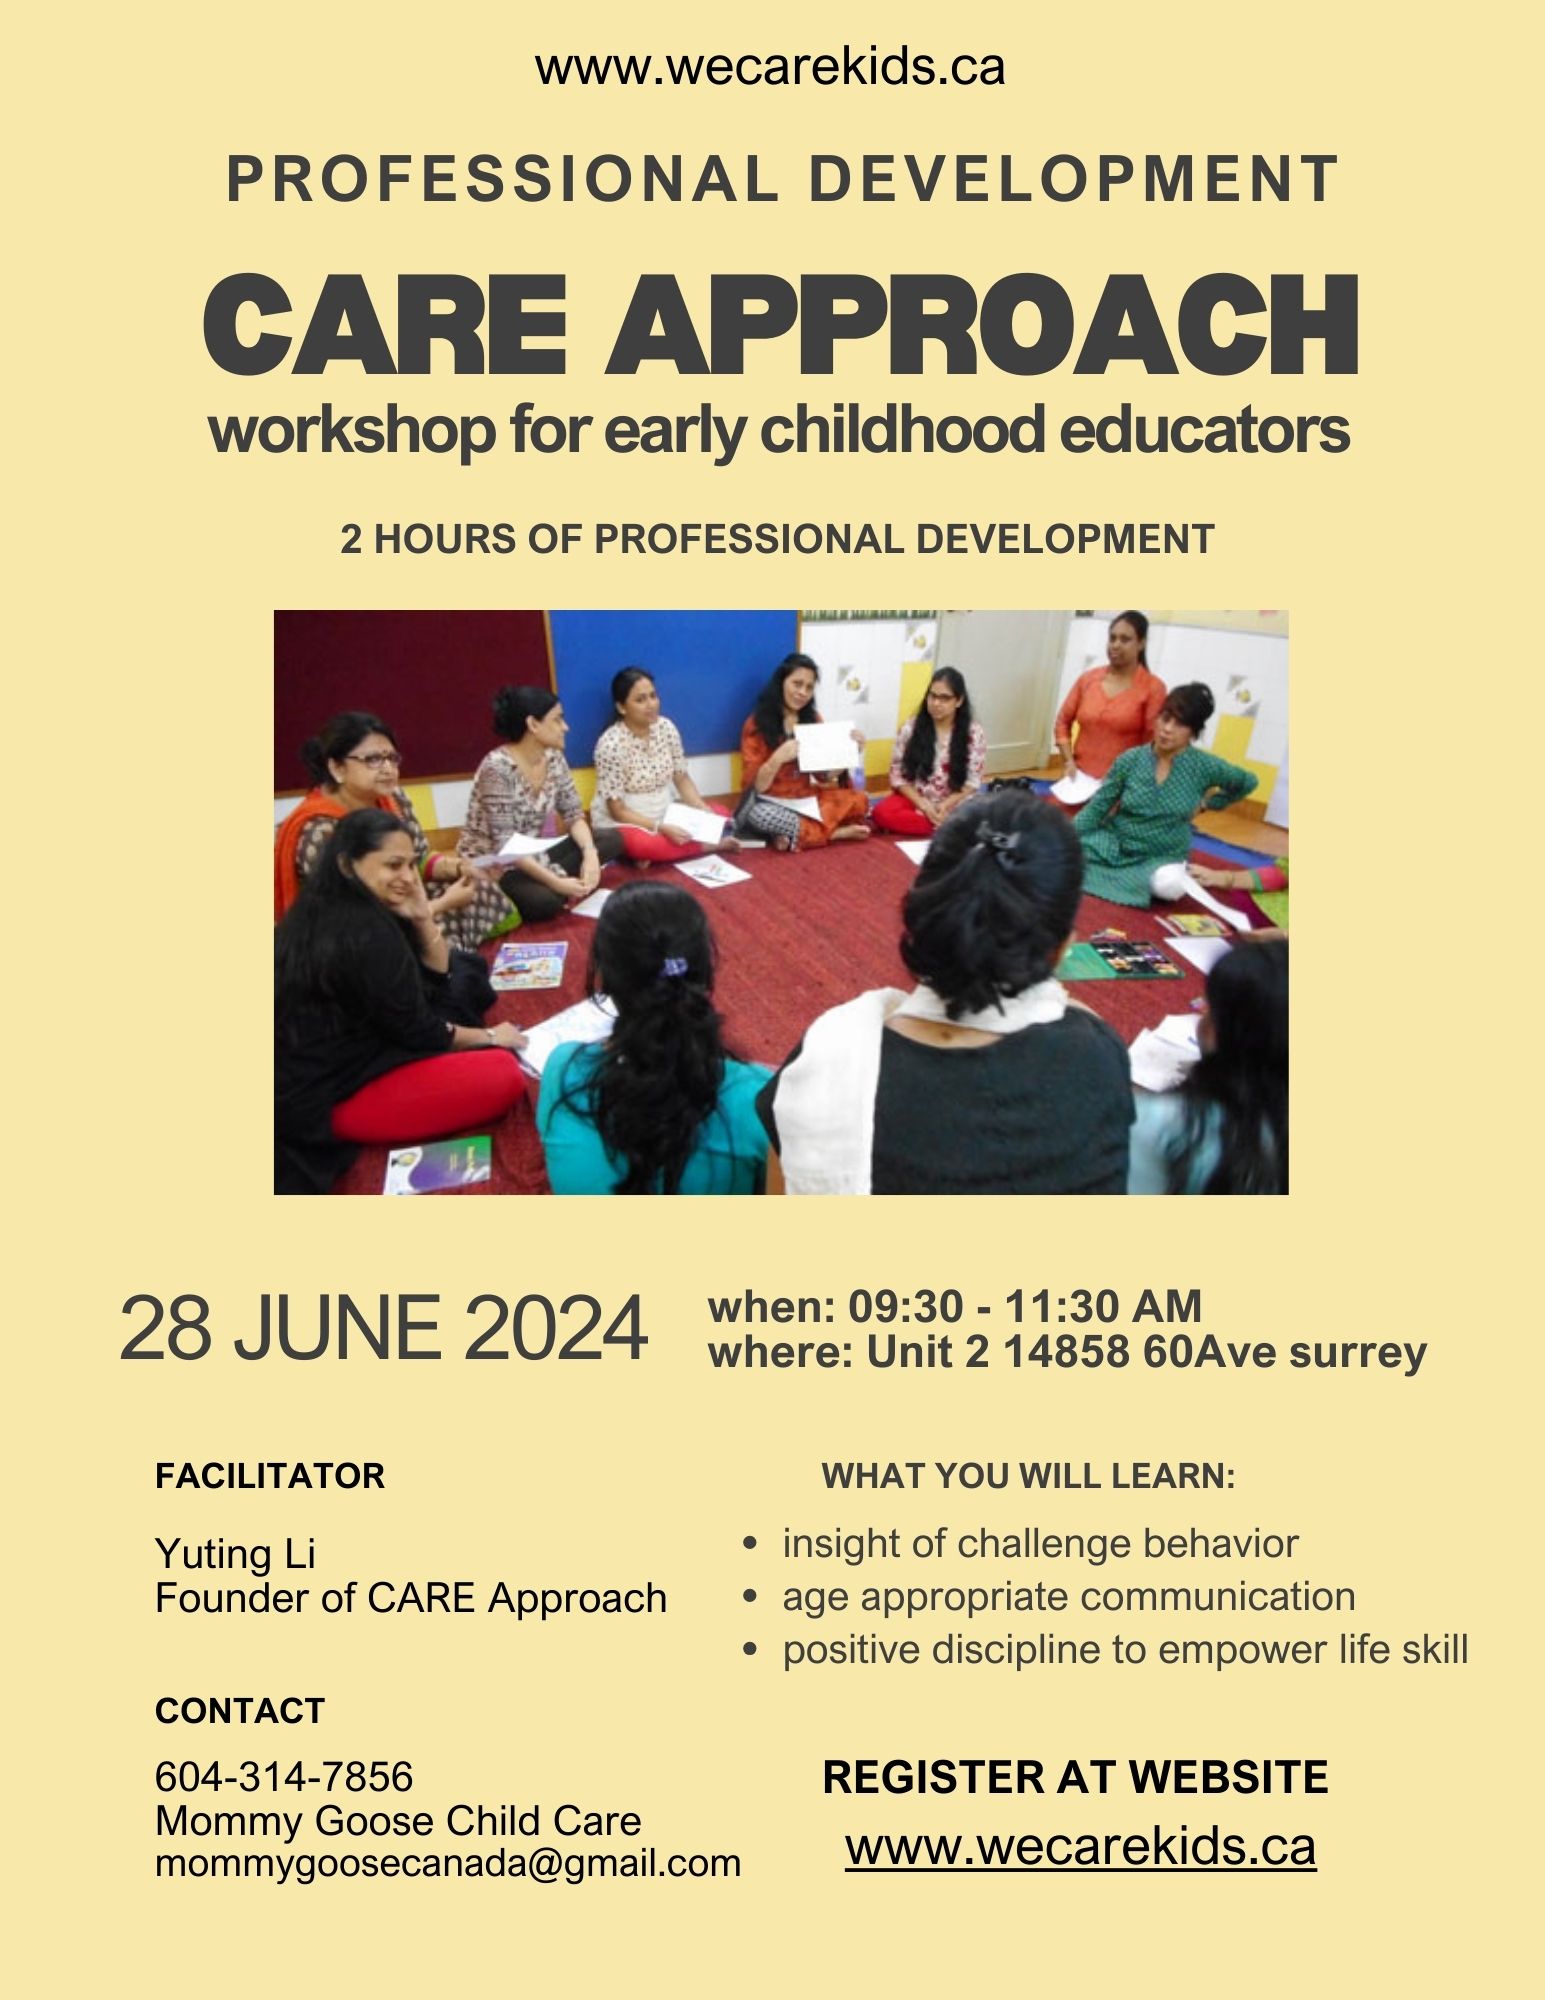 CARE approach Worksop Club 2024, South Surrey, BC